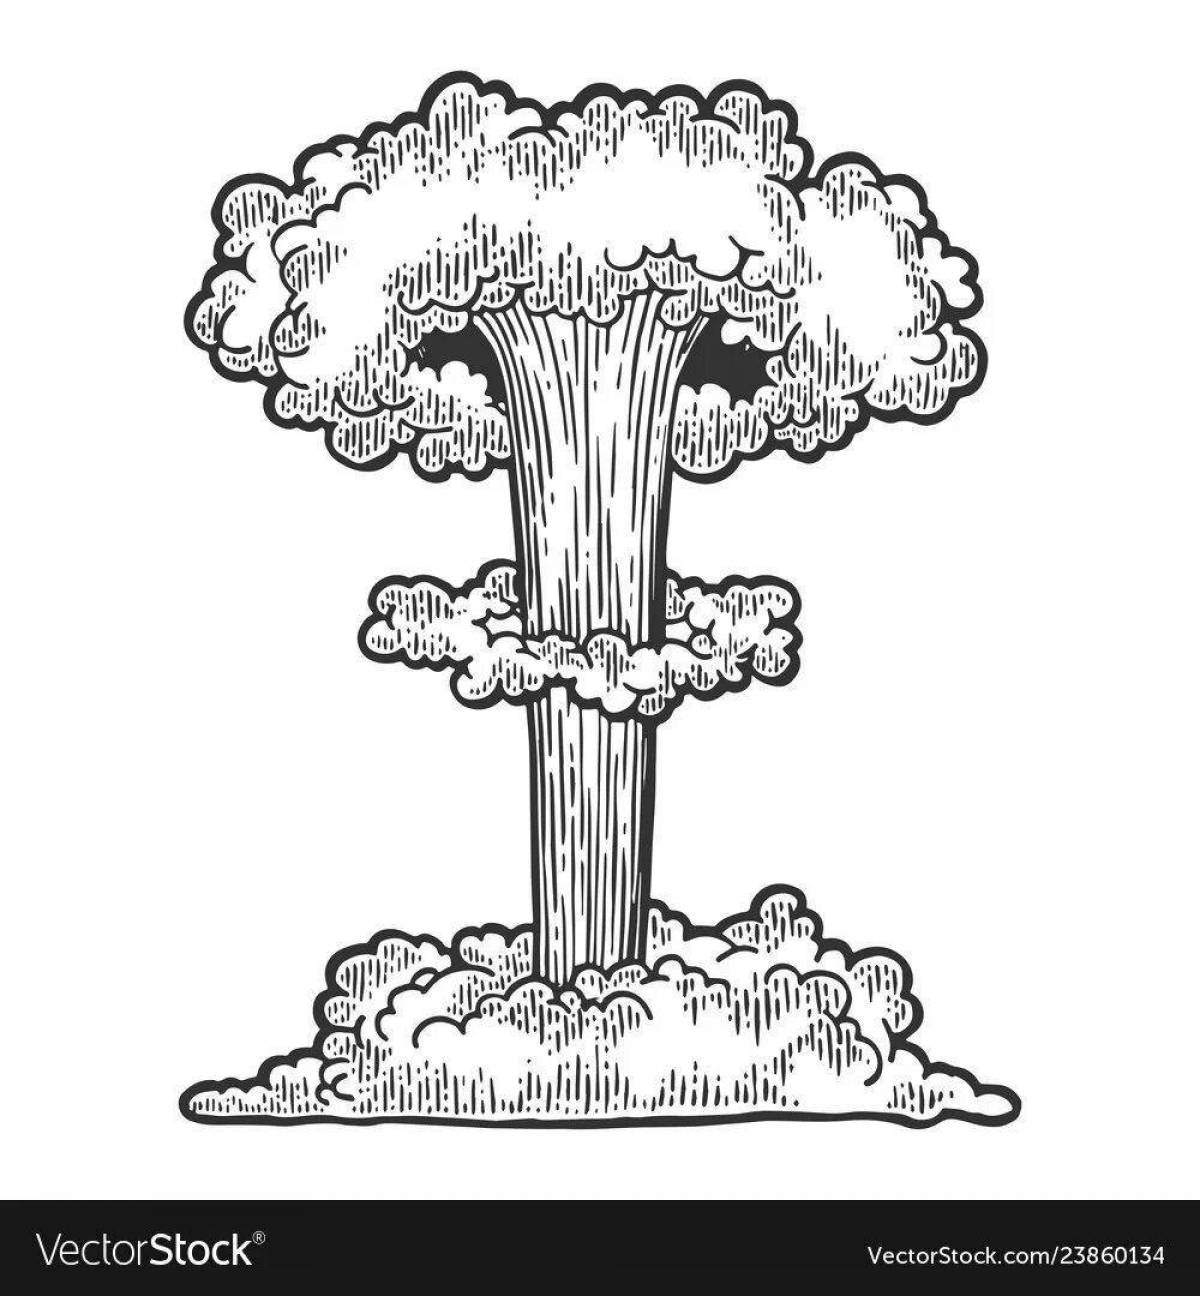 Adorable nuclear explosion coloring book